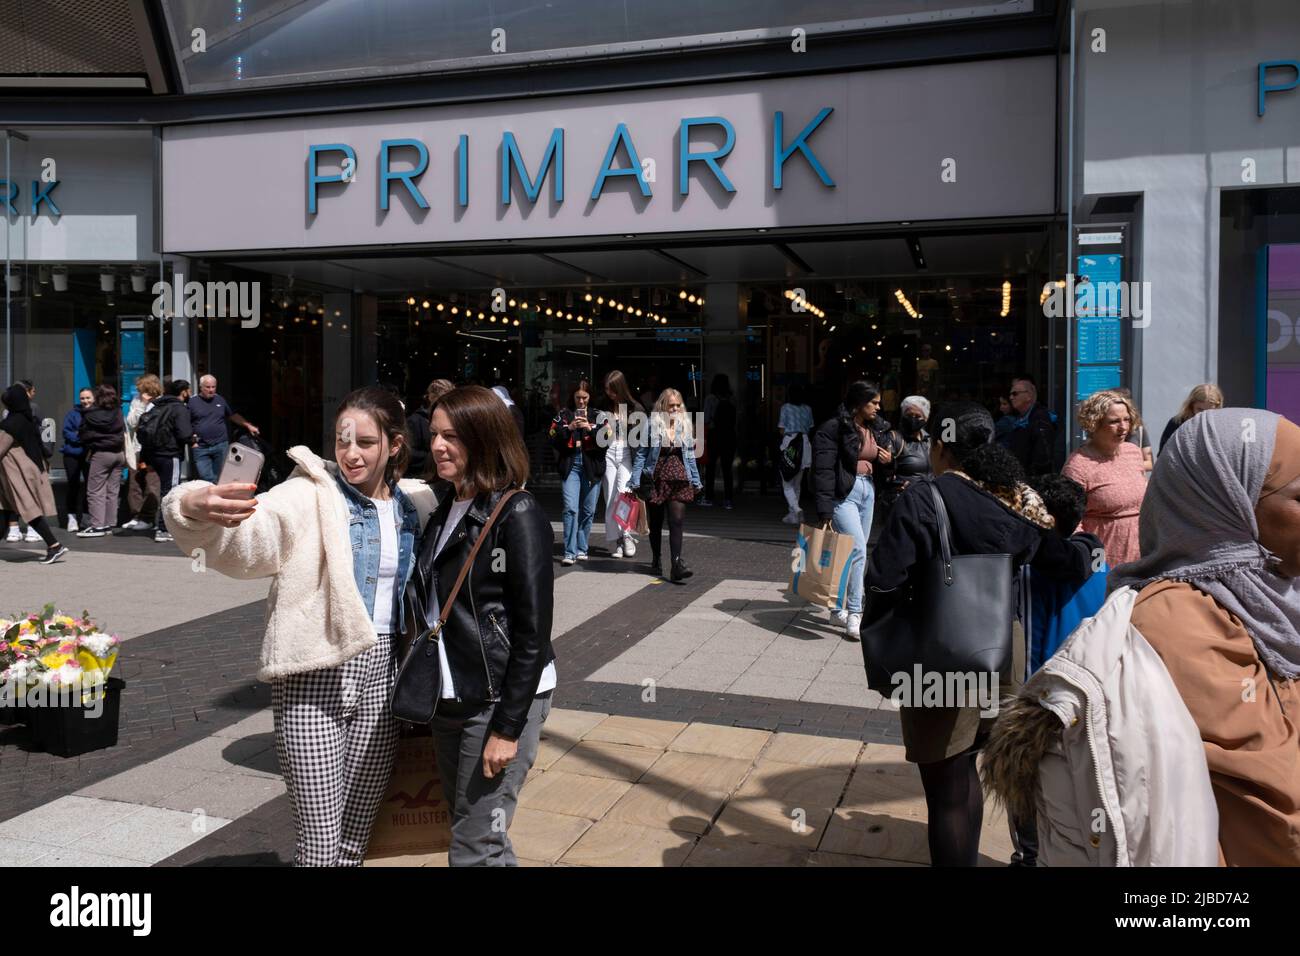 People shopping at Primark in the city centre shopping district on 30th May 2022 in Birmingham, United Kingdom. The Birmingham store is the biggest Primark in the World, and one of their flagship stores, selling clothes at the budget end of the market. The company sources cheaply, using simple designs and fabrics in the most popular sizes and buys stock in bulk. Stock Photo